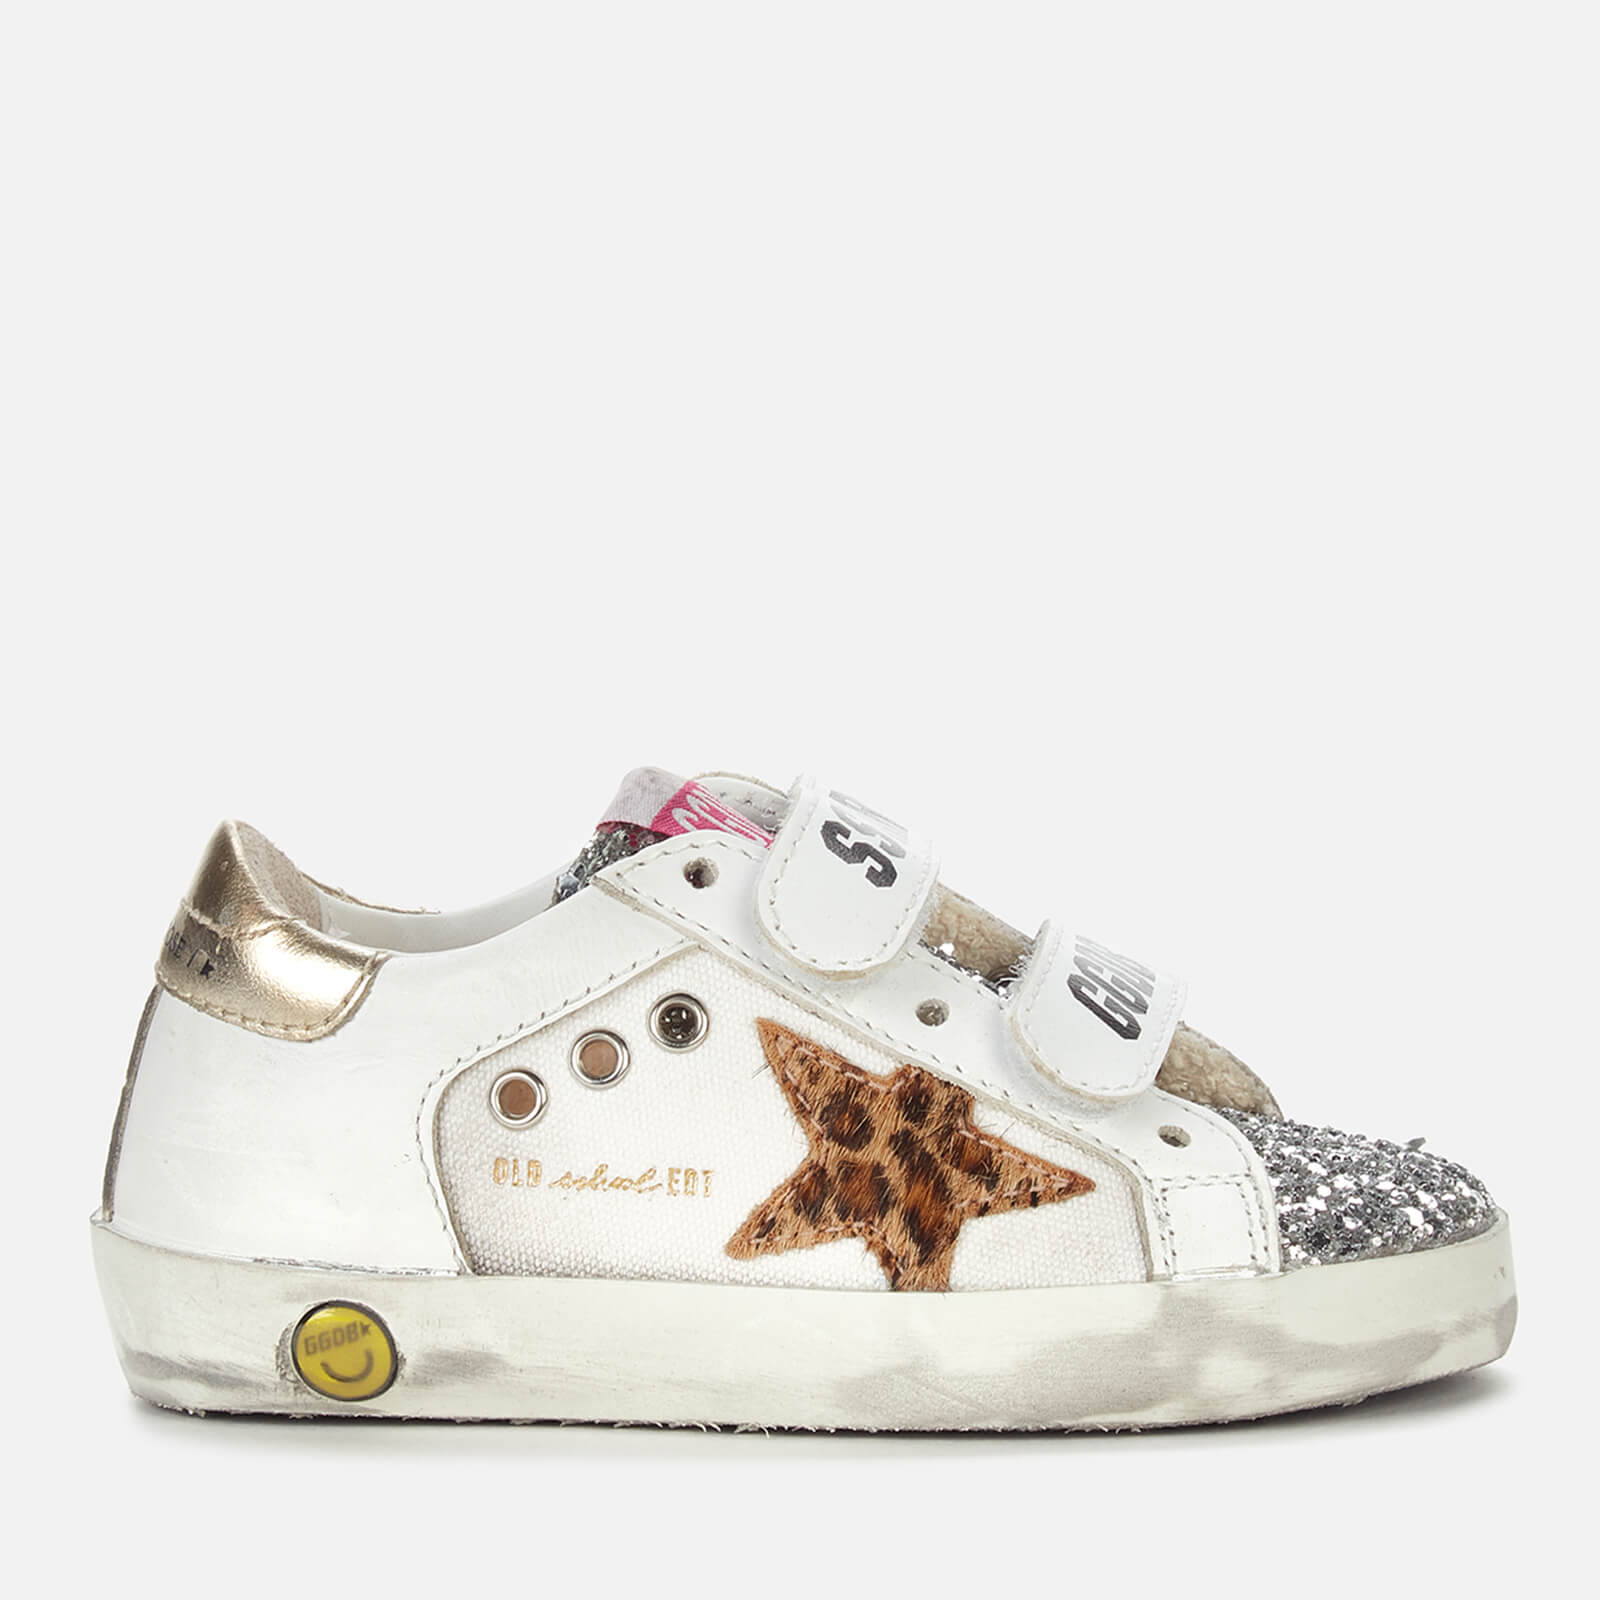 Golden Goose Toddlers' Old School Leather & Canvas Trainers - White/Silver/Beige Leo - UK 9 Toddler